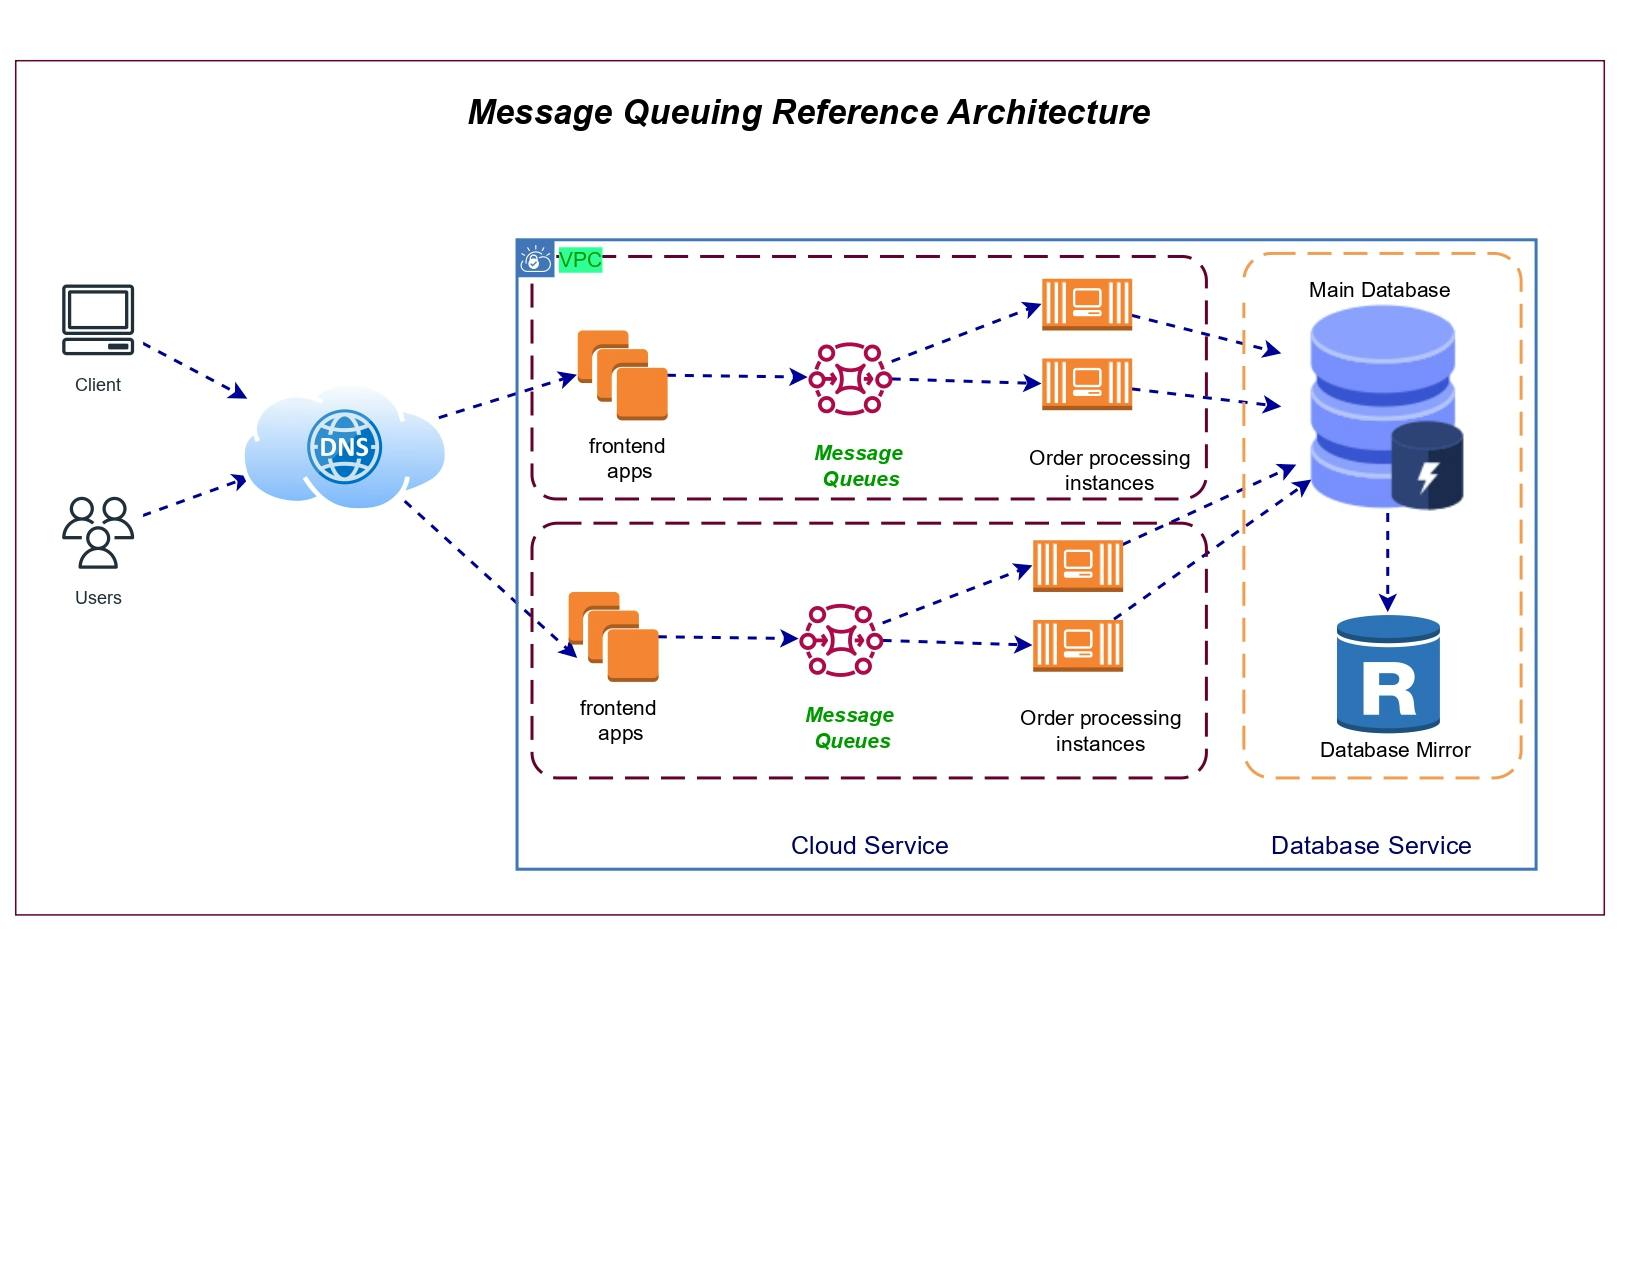 Message Queuing Reference Architecture_upi cloud9prime blog.jpg